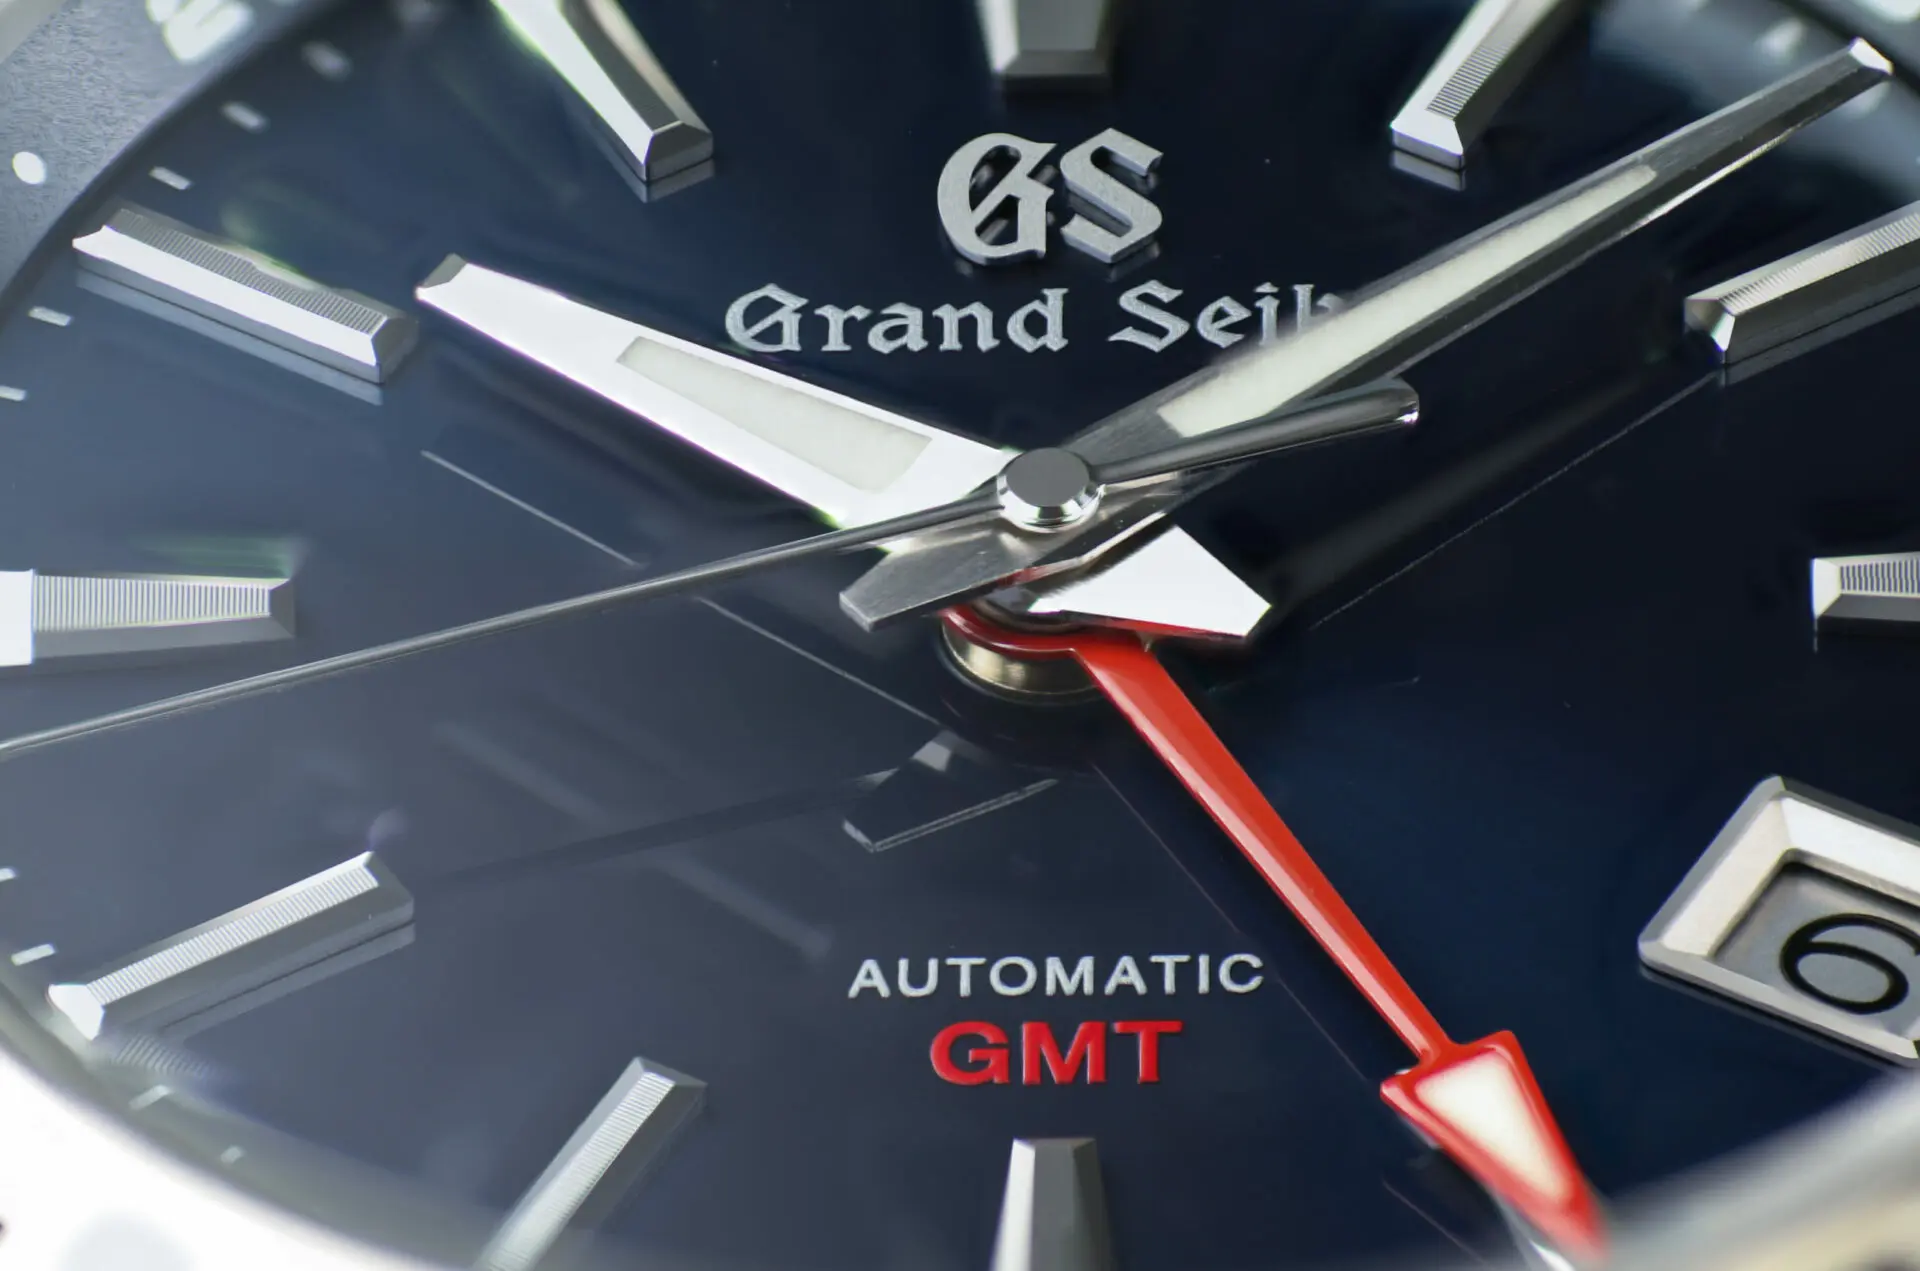 Two New Grand Seiko Automatic GMT's: SBGM245 and SBGM247